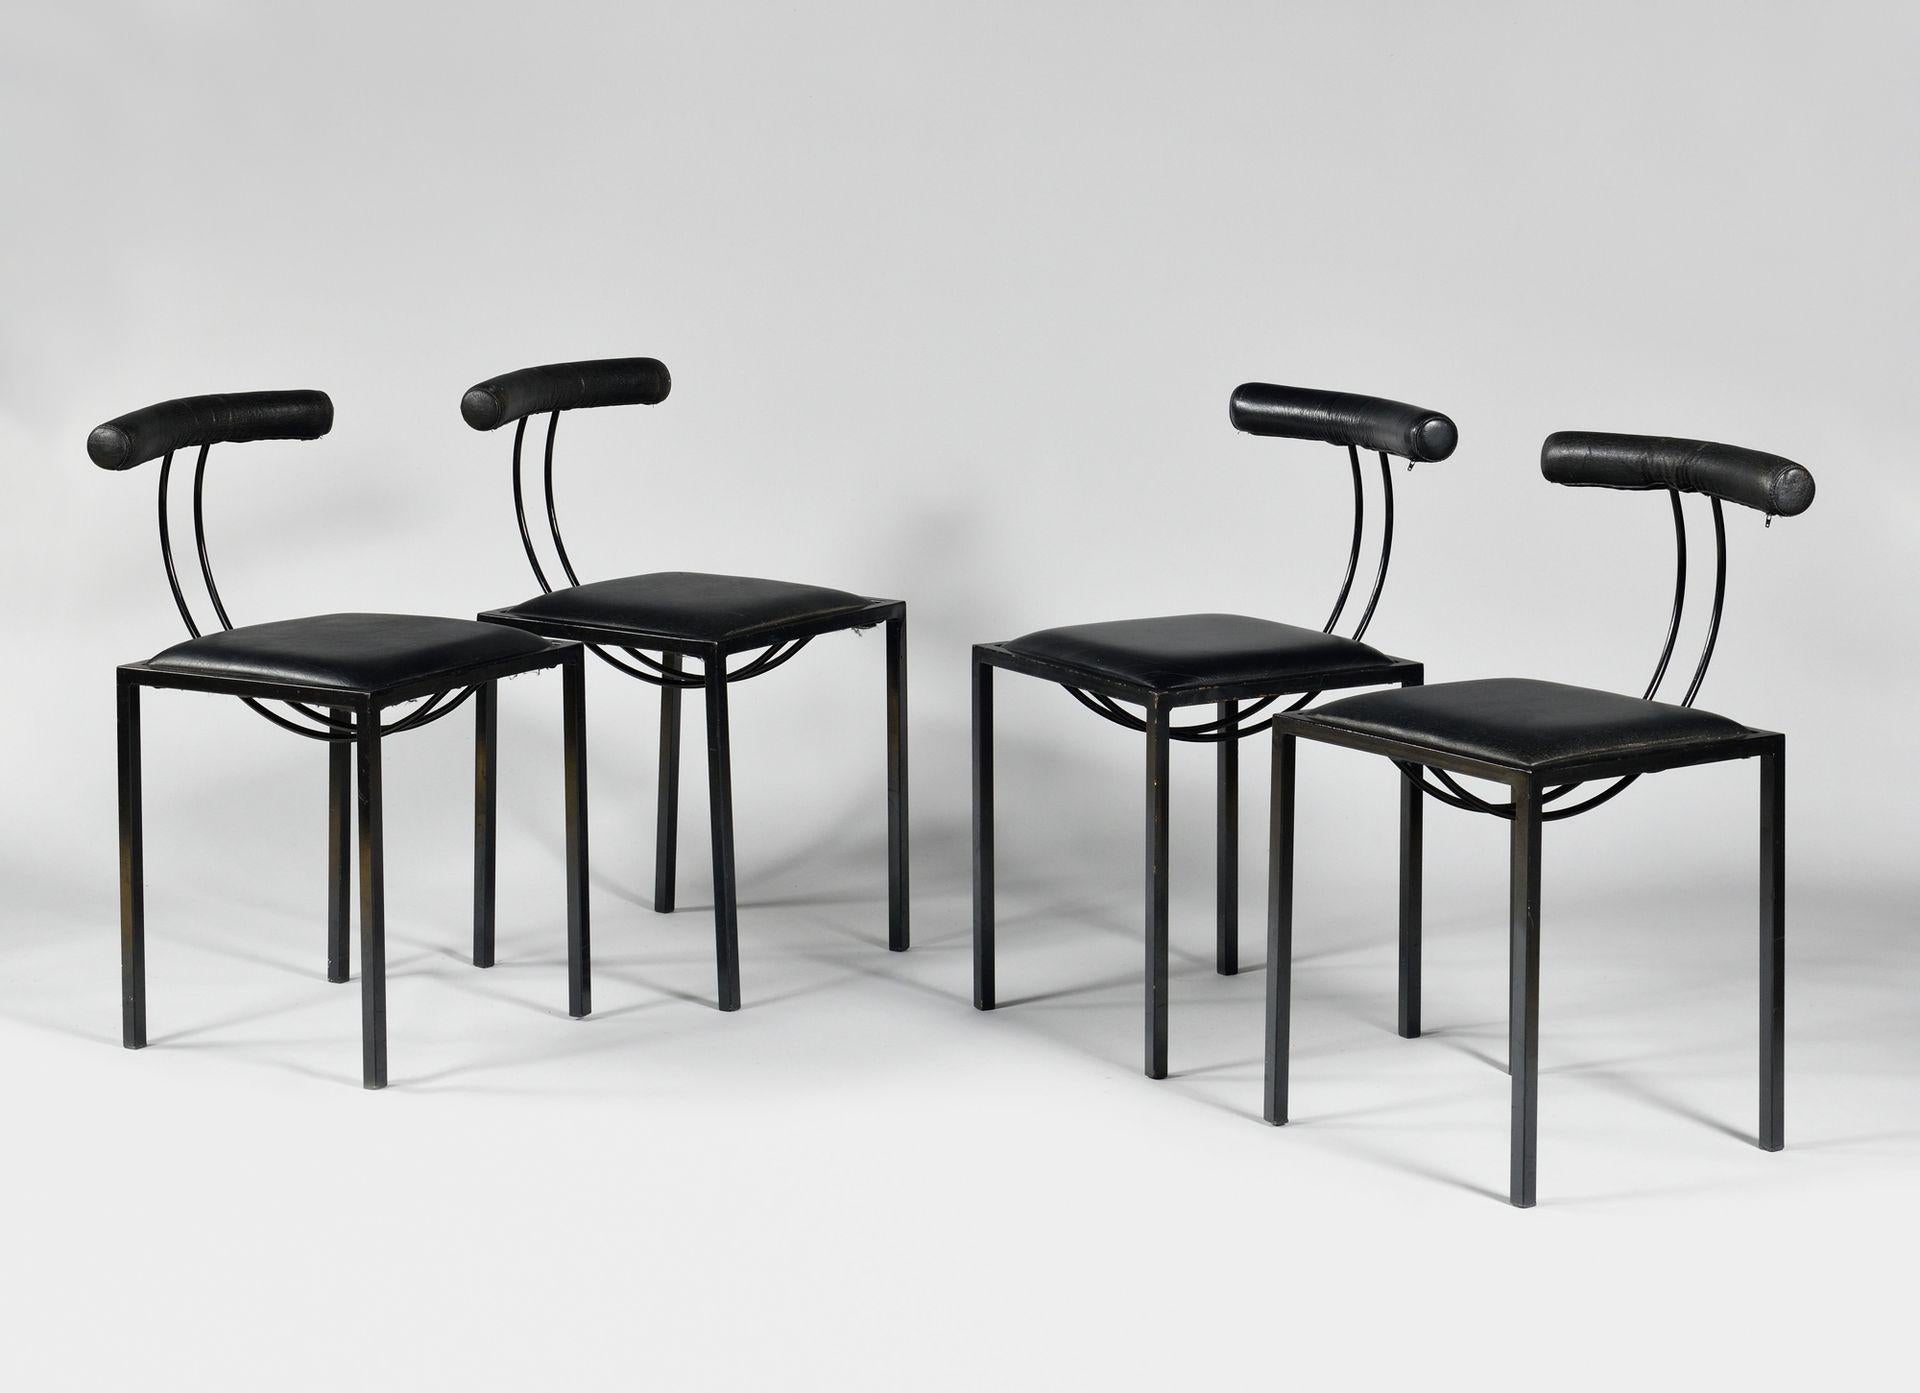 Annick et Samuel Coriat, set of 8 chairs, Artelano ed., circa 1980

Black lacquered metal, chipboard, foam and black skai fabric 
Height 75 x Width 40 x Depth 40 cm

ARTELANO is a French editor of high-end contemporary furniture since 1972. Keeping